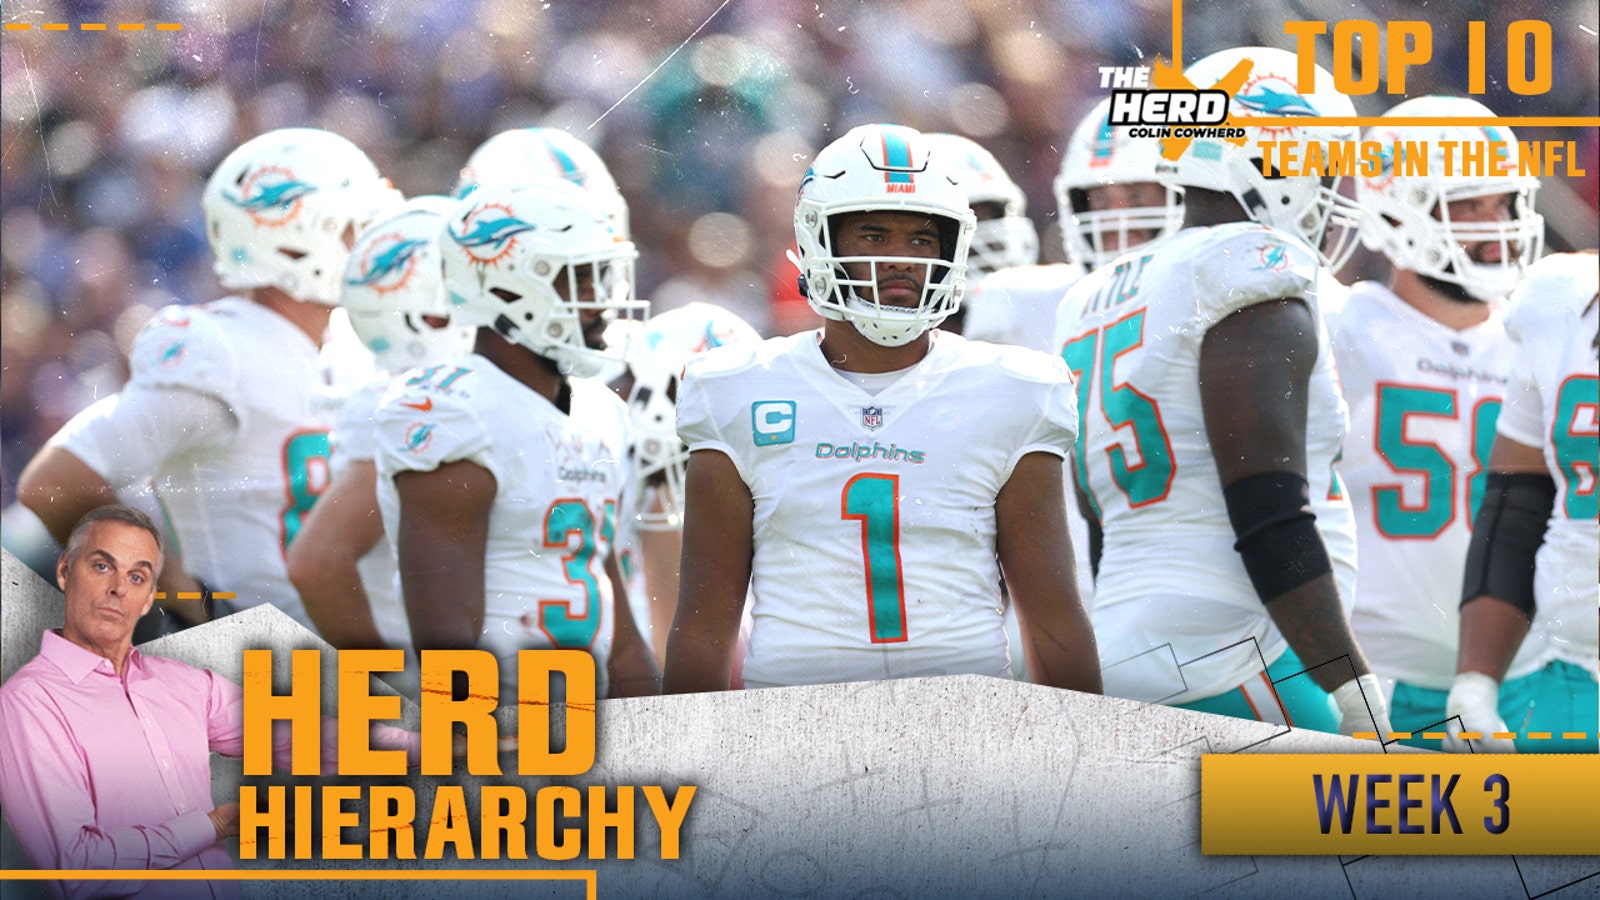 Herd Hierarchy: A new team on top after Week 2